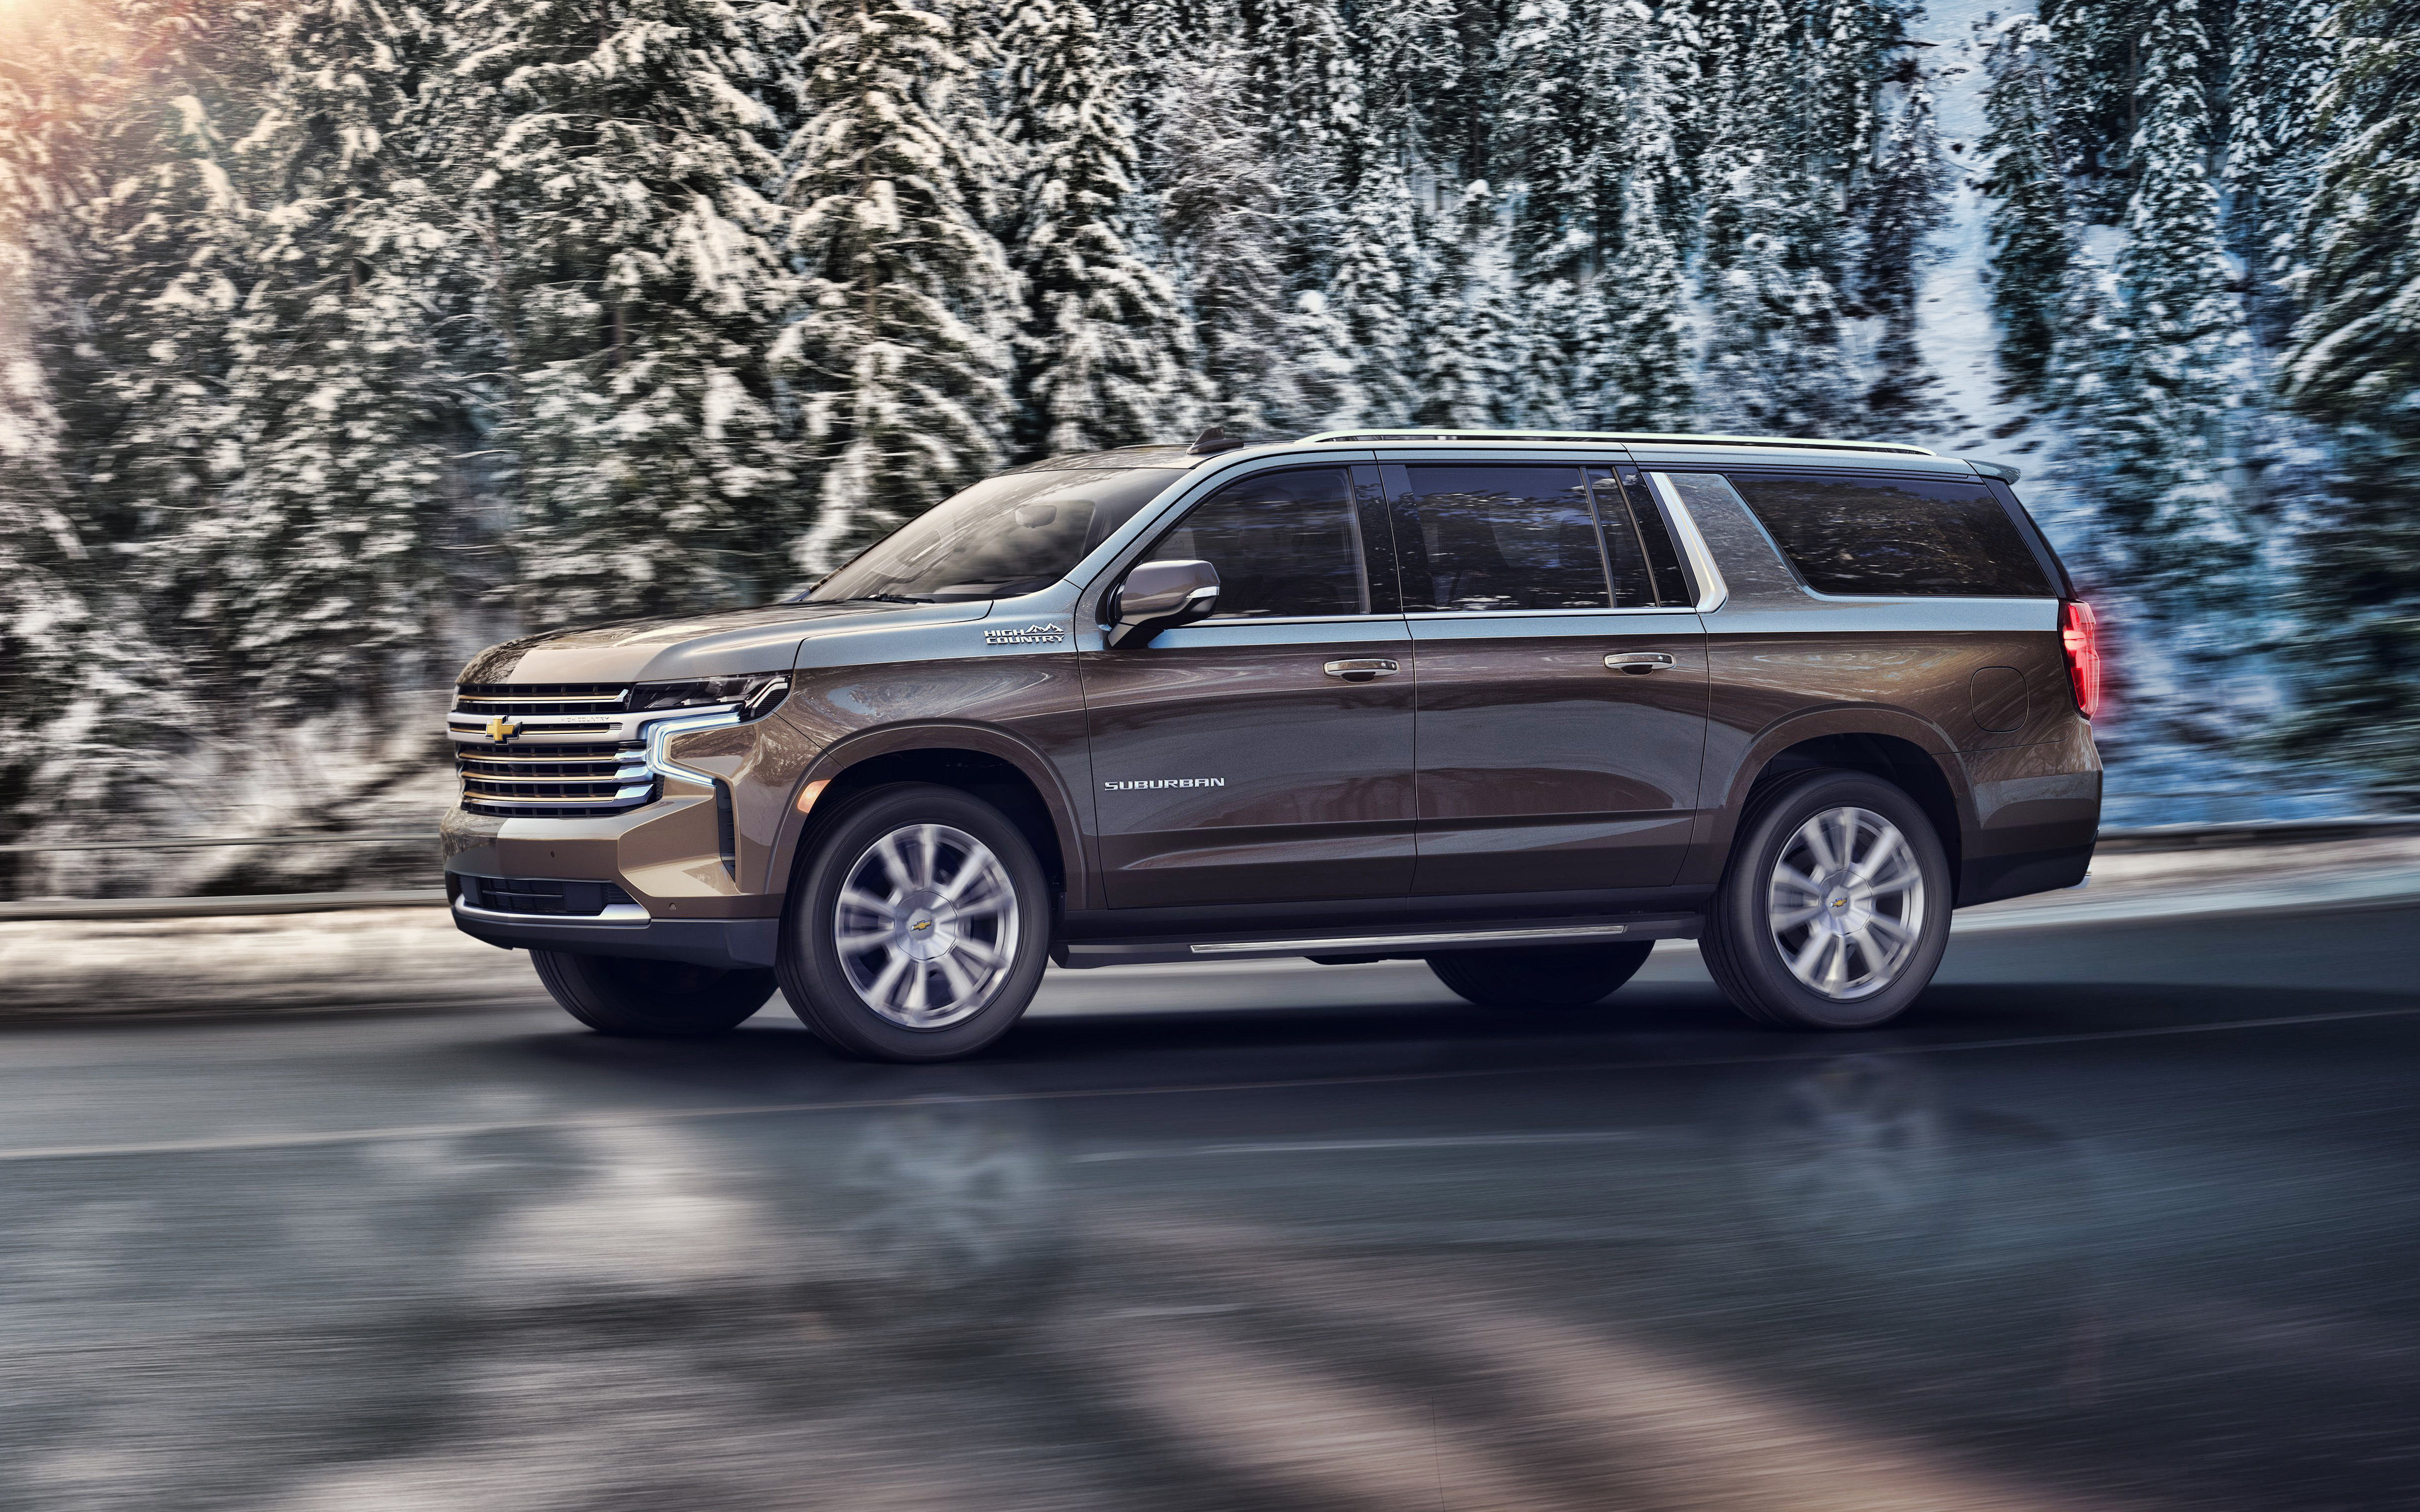 Download wallpaper Chevrolet Suburban, side view, exterior, luxury SUV, new brown Suburban, american cars, Chevrolet for desktop with resolution 3840x2400. High Quality HD picture wallpaper